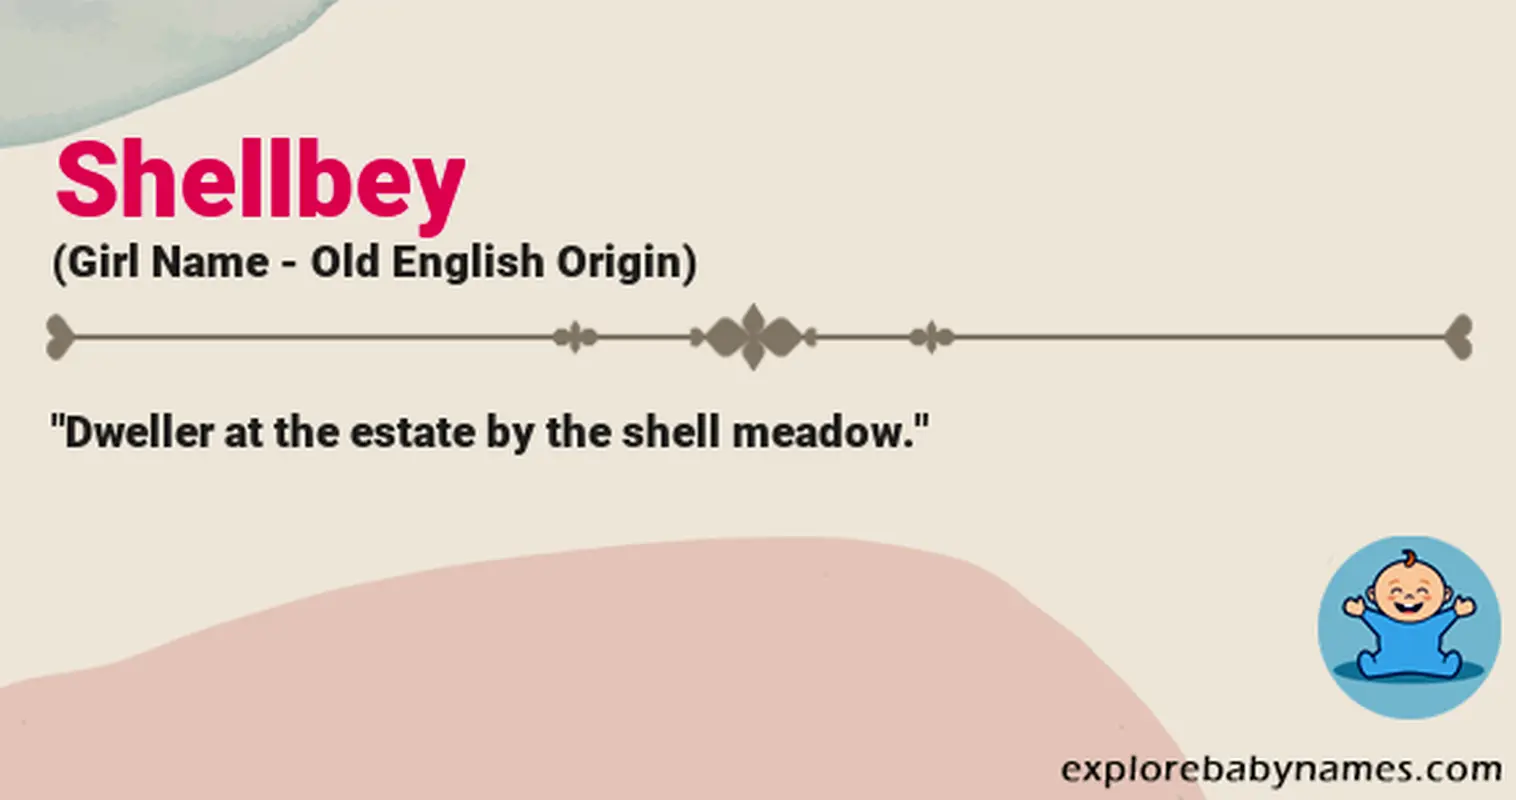 Meaning of Shellbey